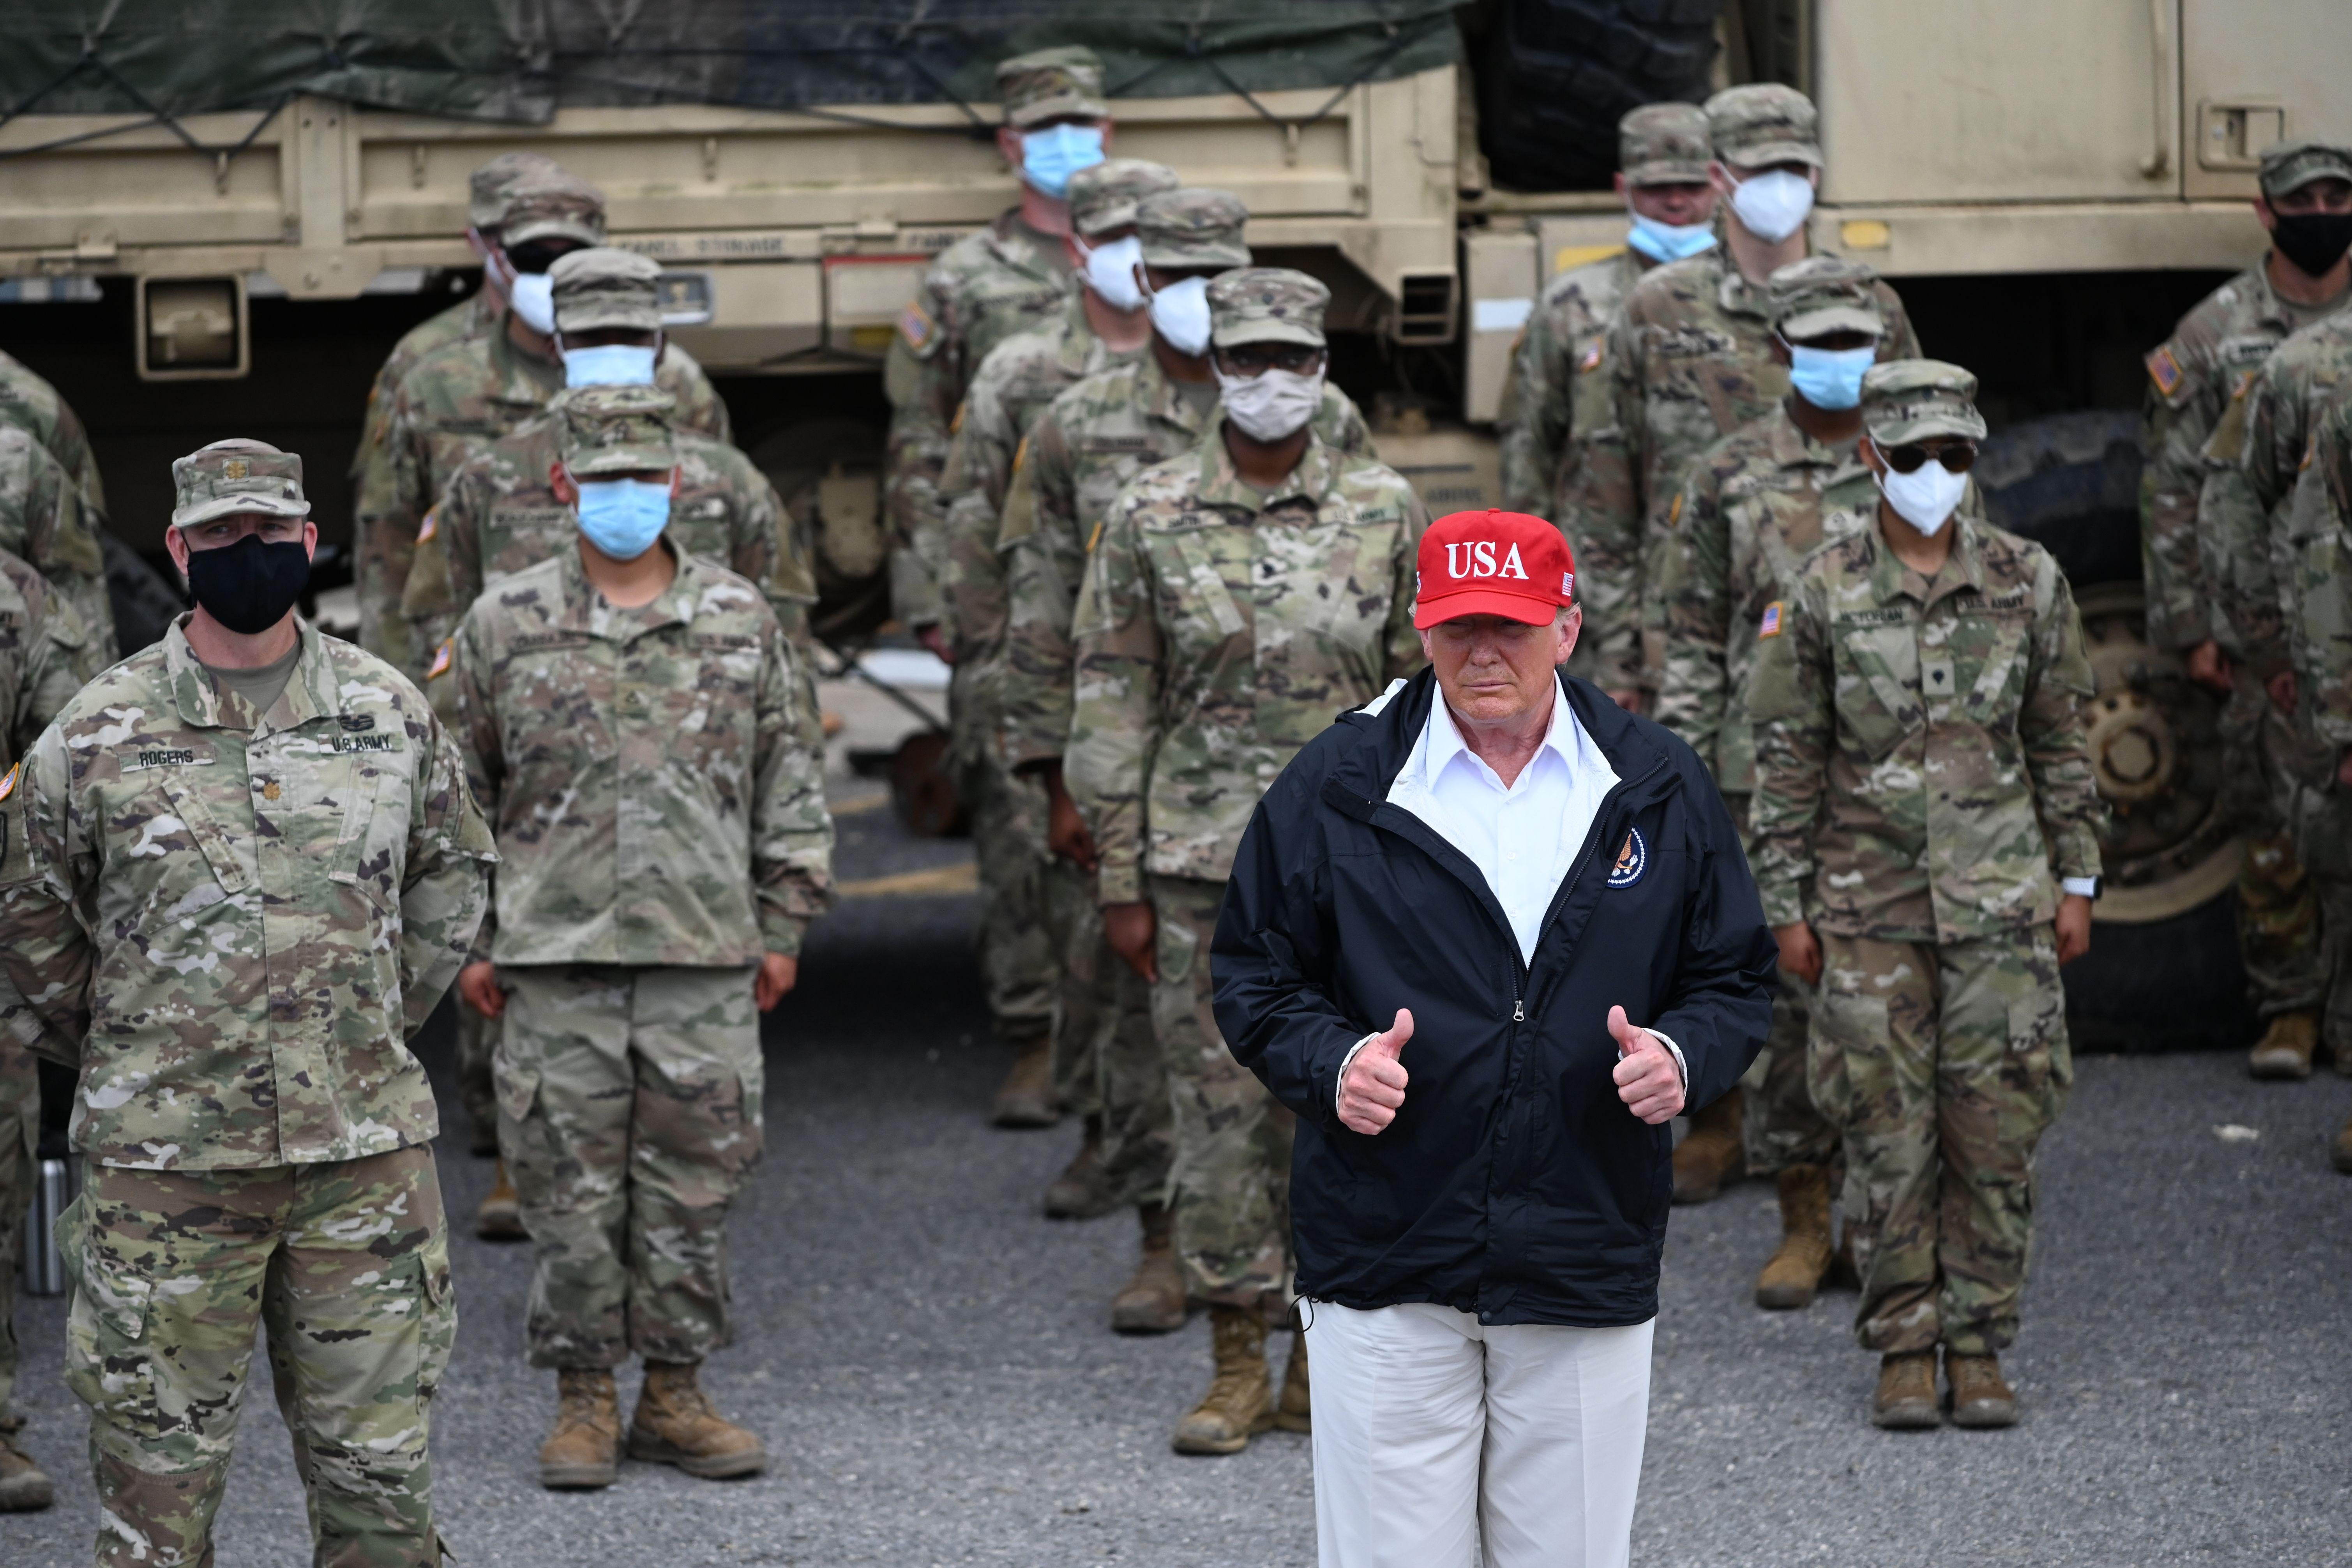 Donald Trump, in a blue jacket and red USA cap, stands in front of rows of National Guardsmen wearing camouflage, sunglasses, and masks. Trump is giving two thumbs up.